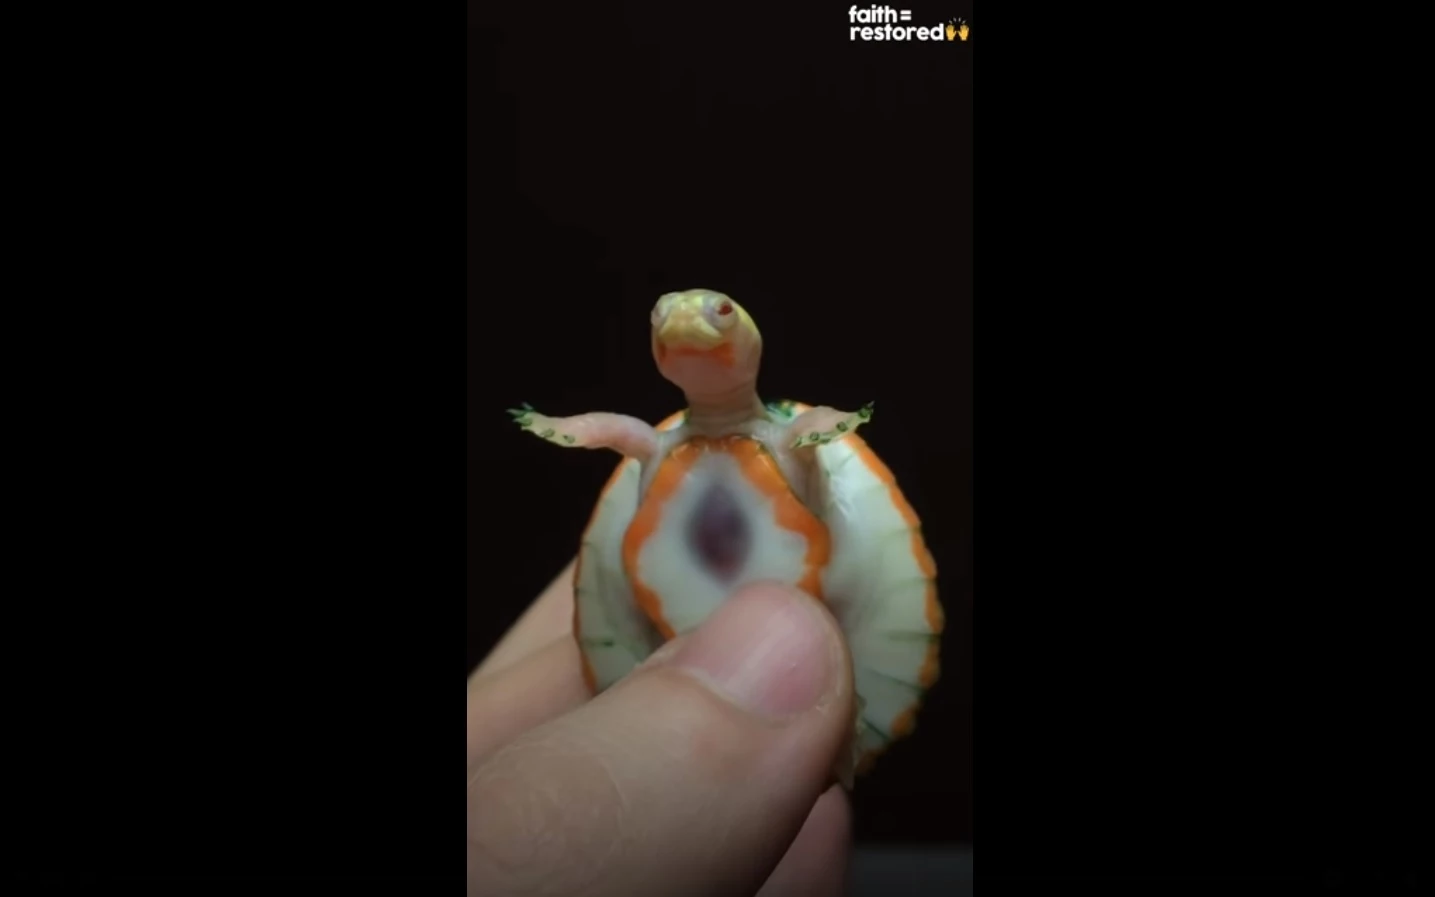 Teeny Tiny Turtle With Exposed Heart Defies The Odds By Living Her